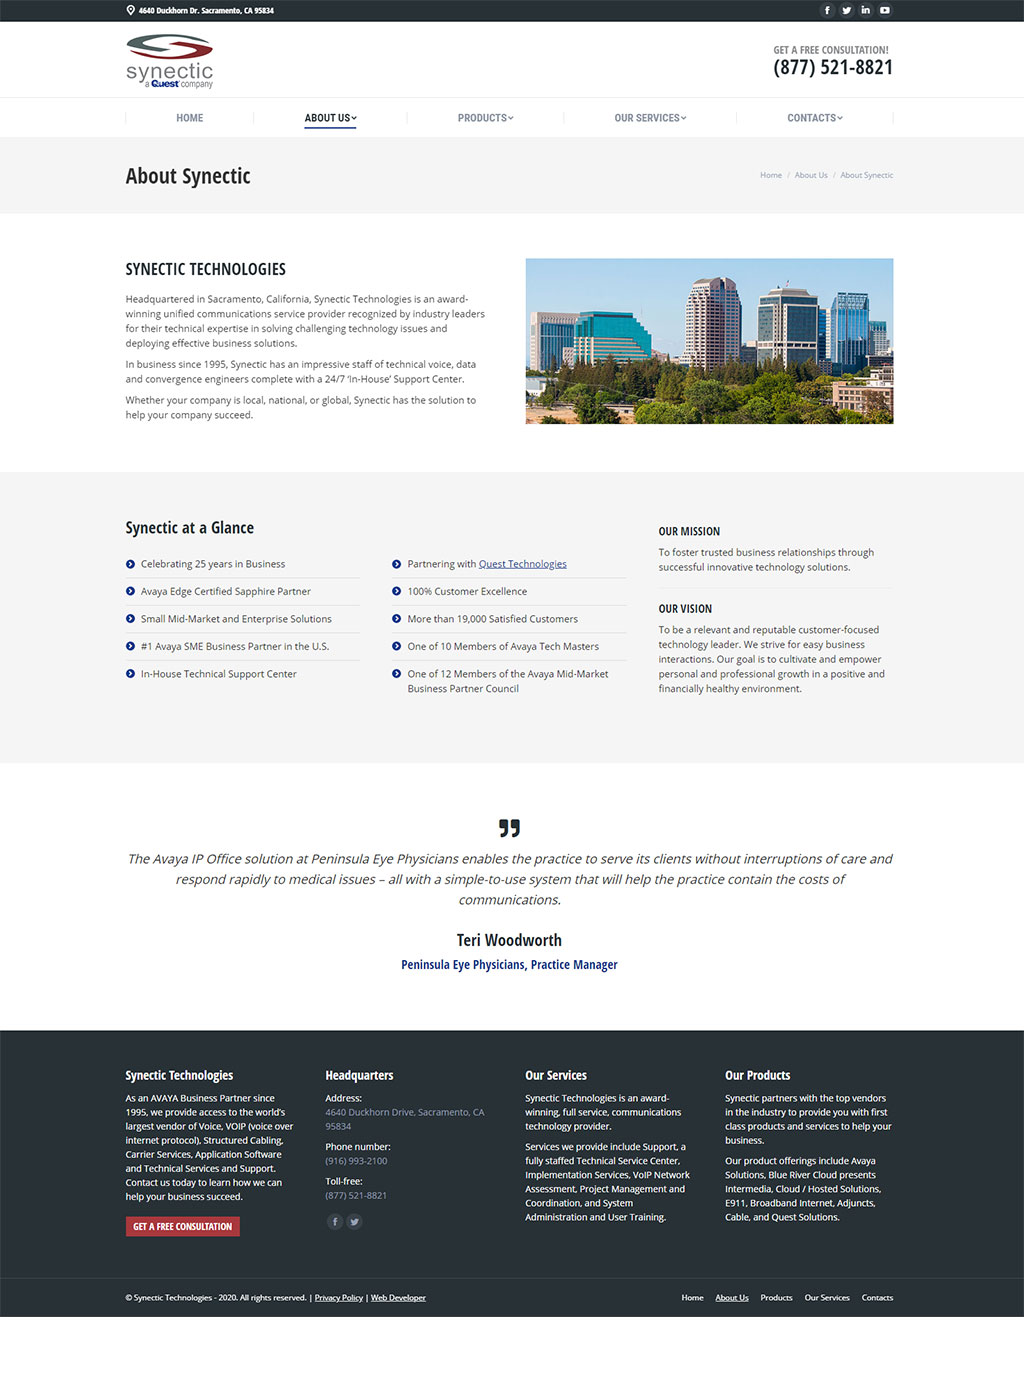 Website developed for Synectic Technologies